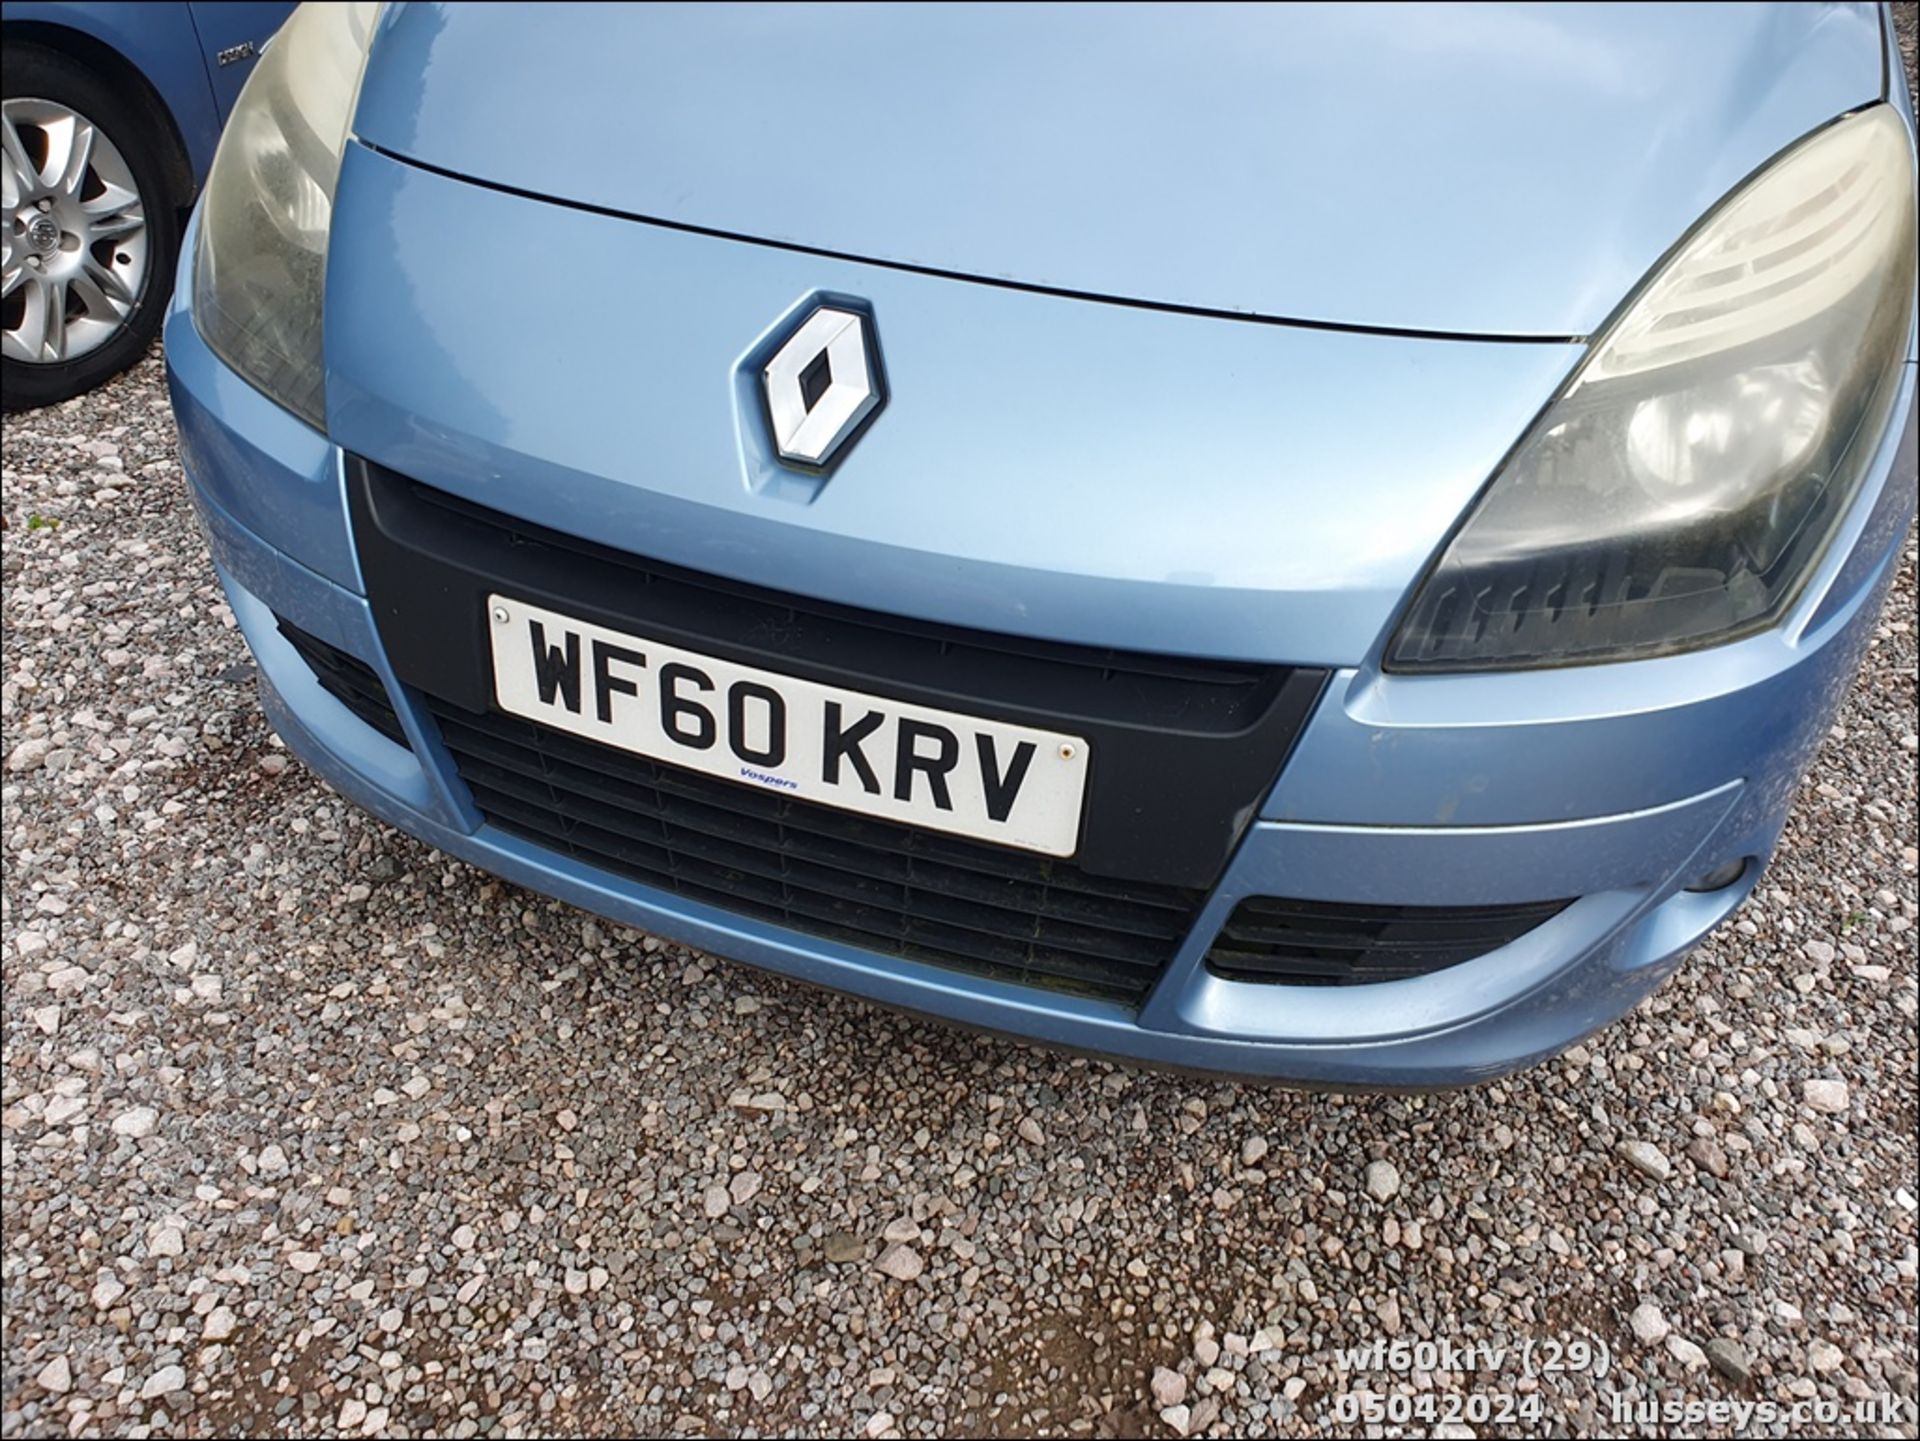 10/60 RENAULT SCENIC EXPRESSION DCI 105 - 1461cc 5dr MPV (Blue) - Image 30 of 50